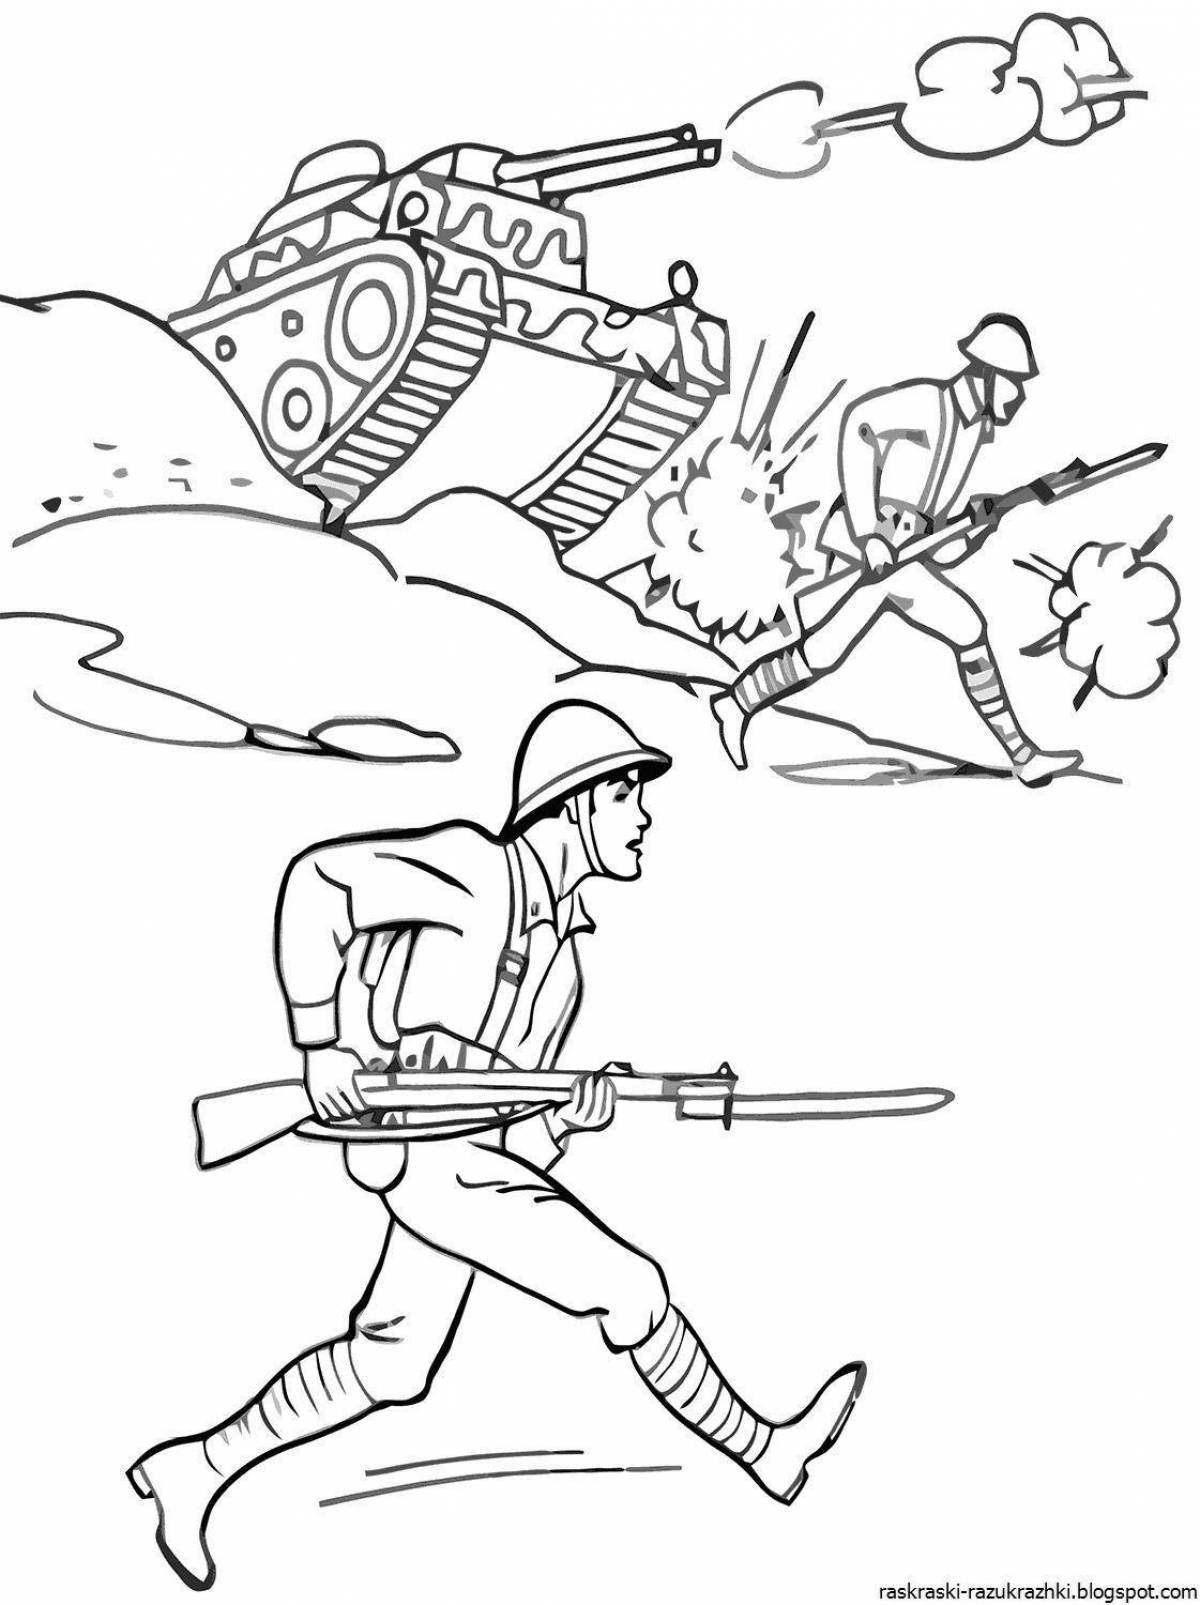 Coloring book unstoppable battle of Stalingrad